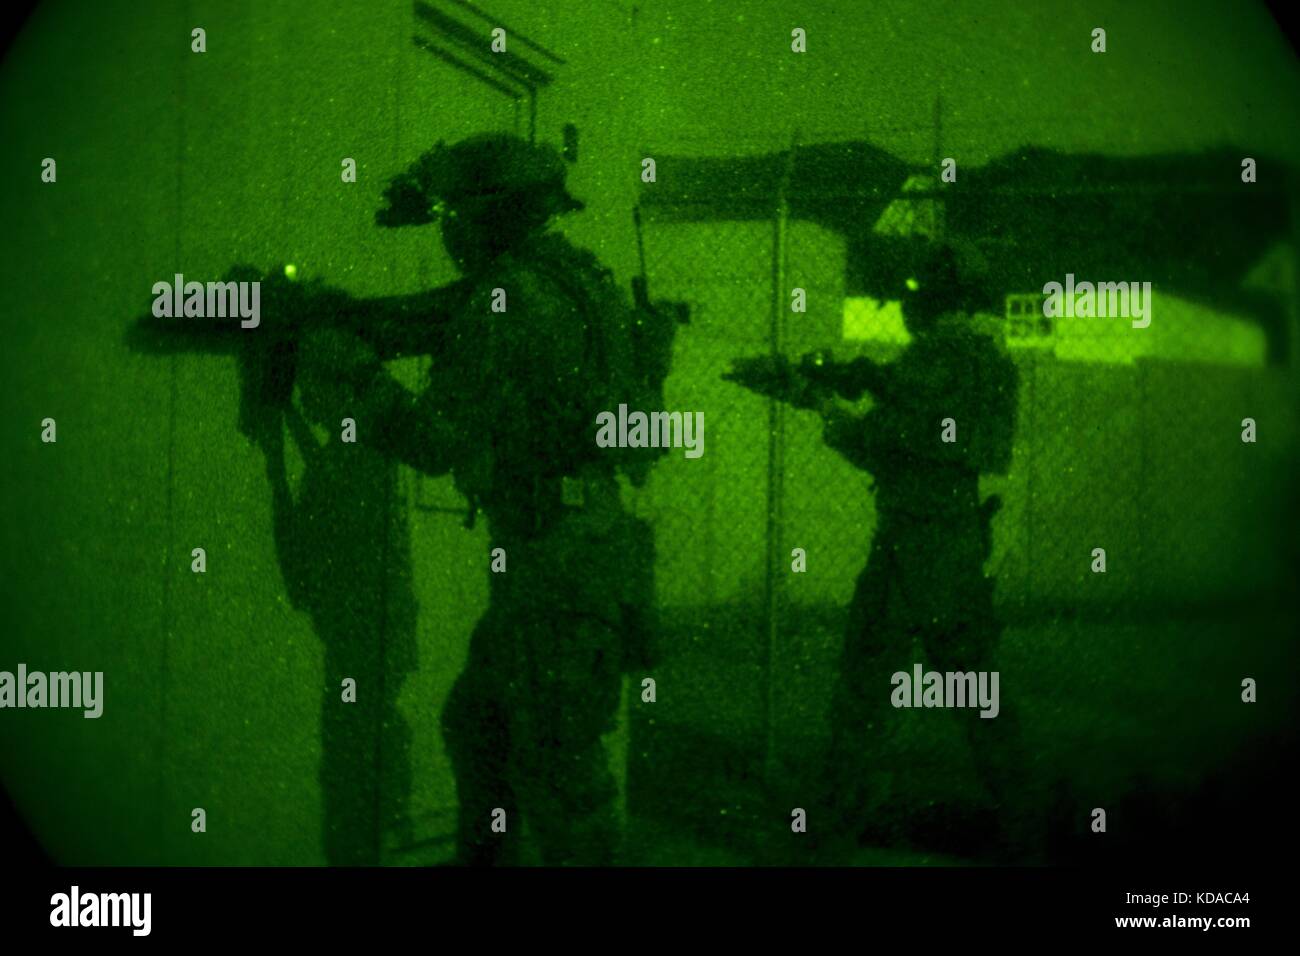 U.S. Marine Corps soldiers provide security through night vision goggles during visit, board, search and seizure training for the Company Collective Exercise at the Marine Corps Base Camp Pendleton October 15, 2015 in San Diego, California. Stock Photo